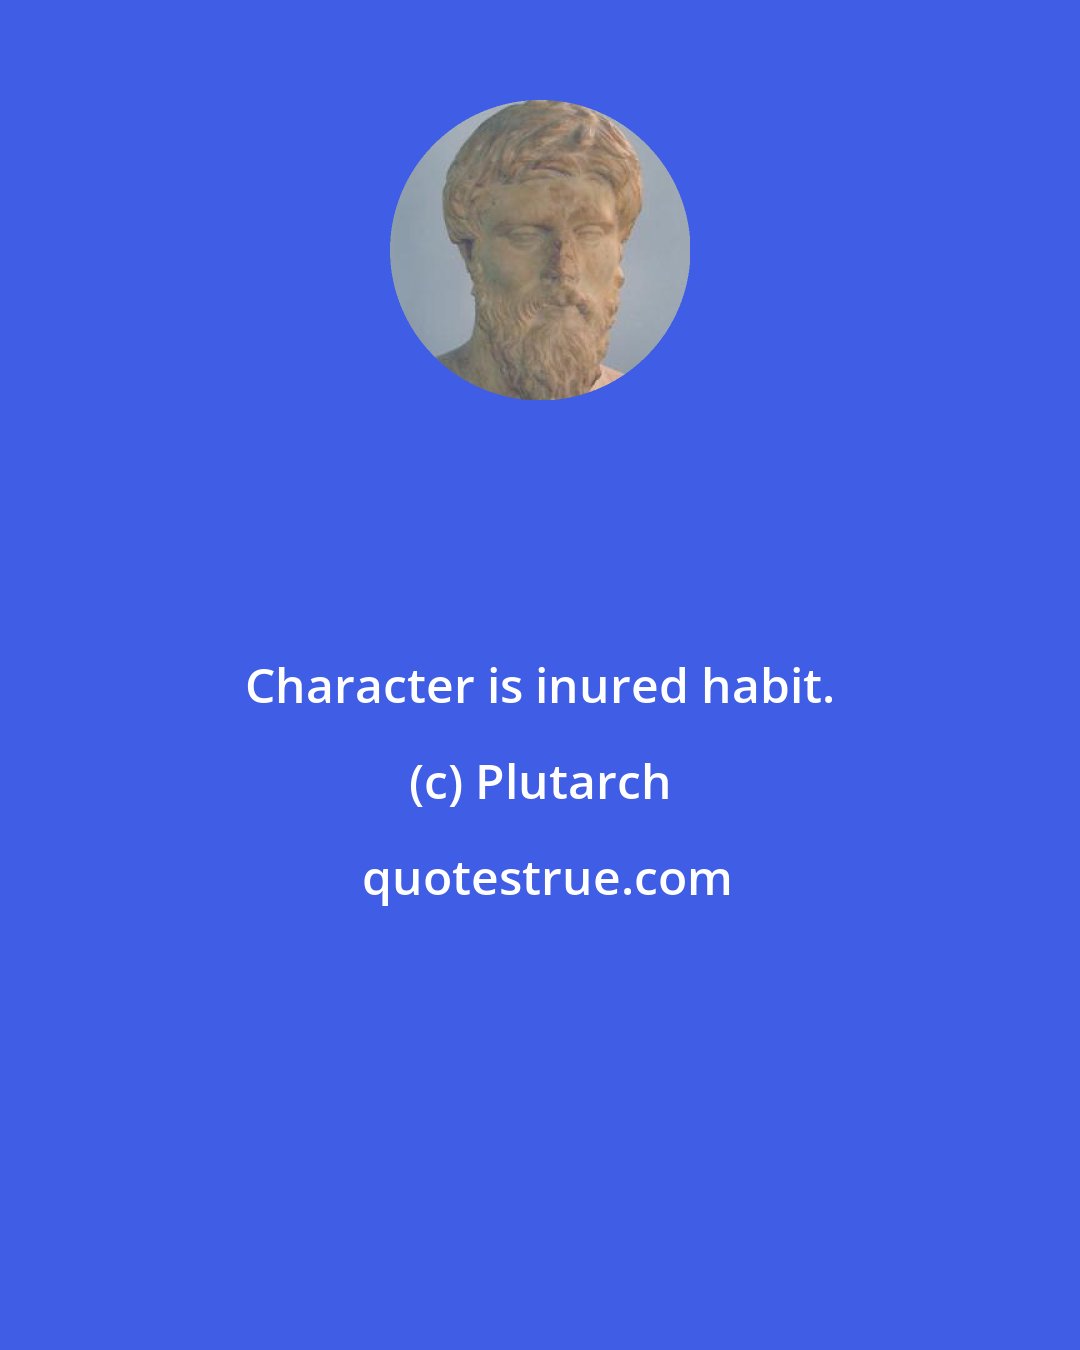 Plutarch: Character is inured habit.